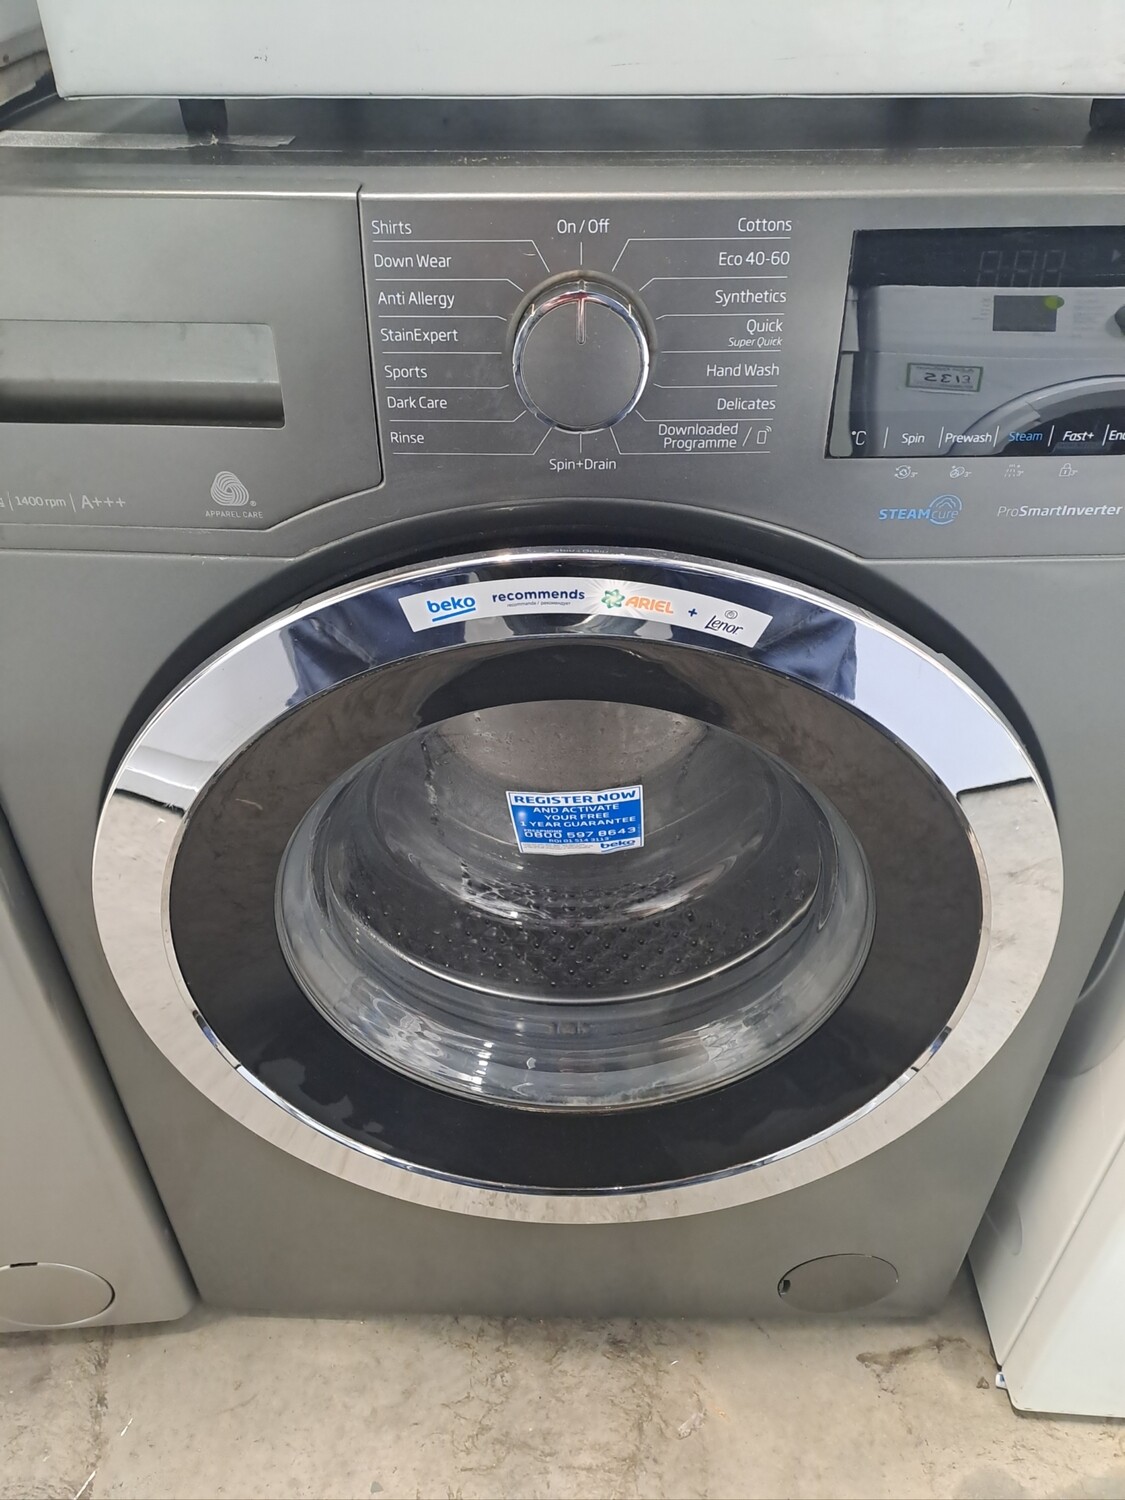 Beko WER860541G 8kg Load 1400 Spin Washing Machine - Graphite Grey - Refurbished - 6 Month Guarantee. This item is located in our Whitby Road Shop 